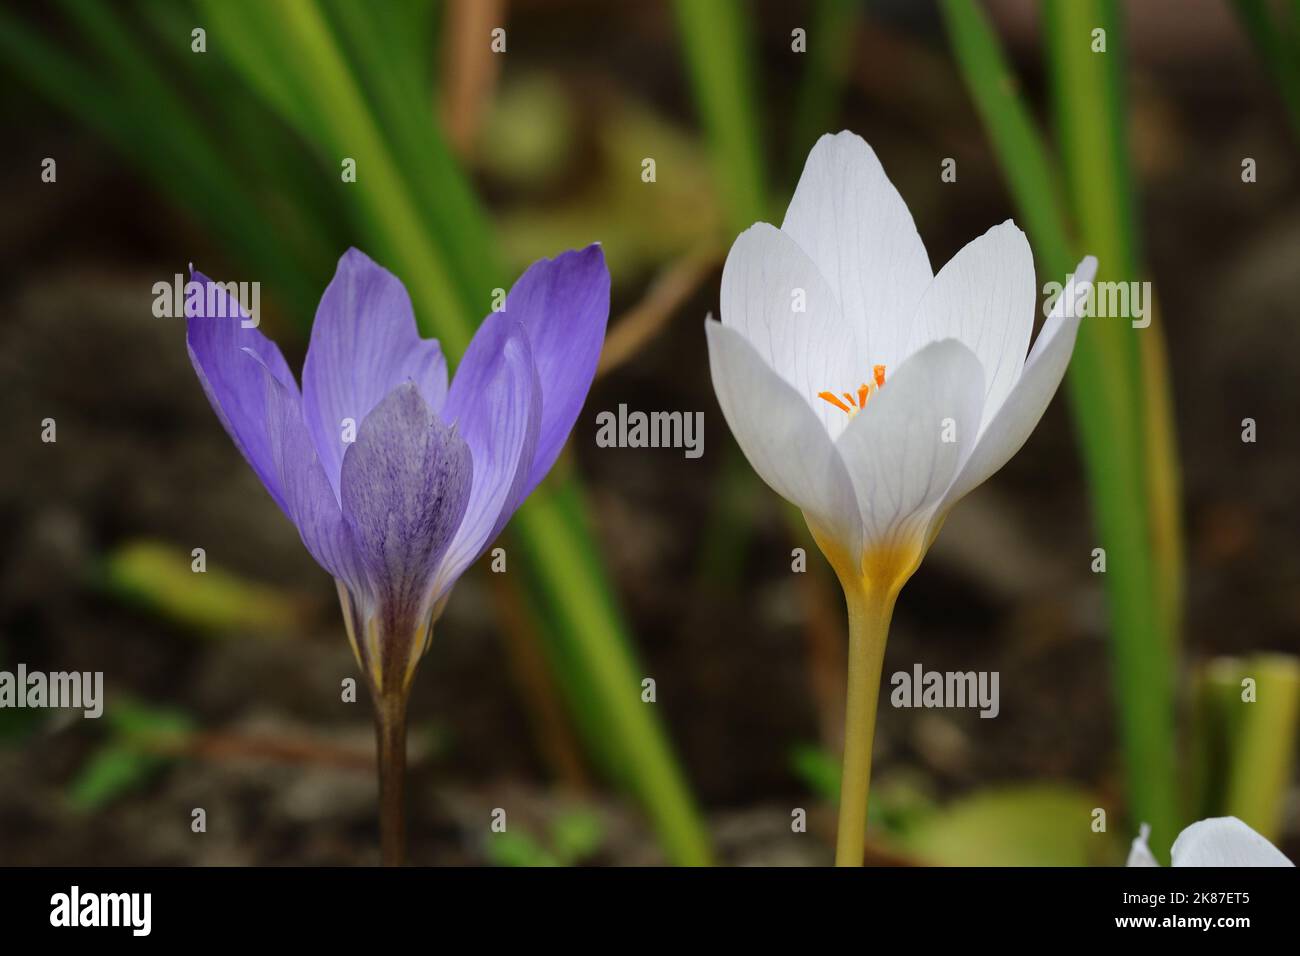 Close-up of the two beautiful autumn-flowering crocuses against a natural blurry background, side view Stock Photo